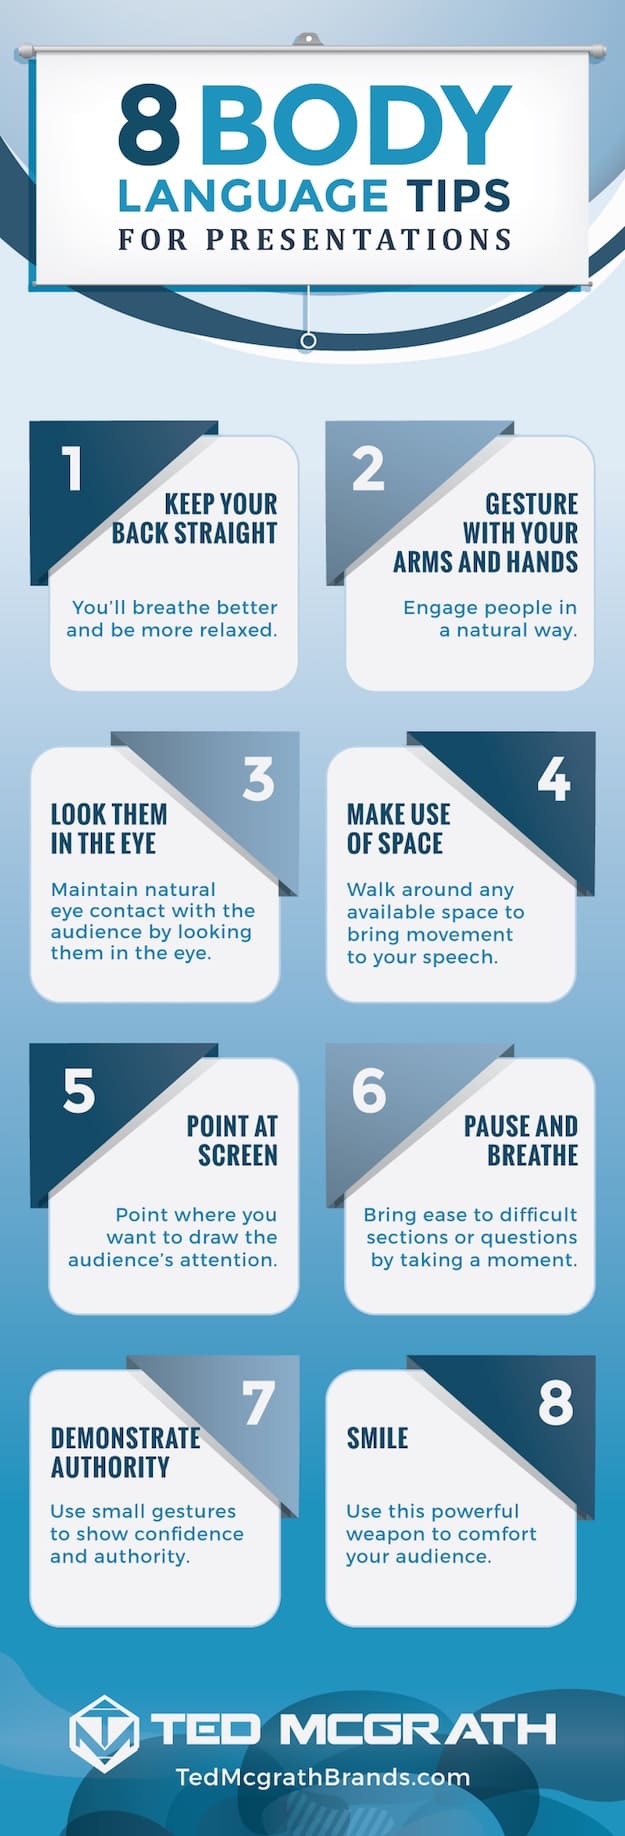 8 Body Language Tips for Presentations